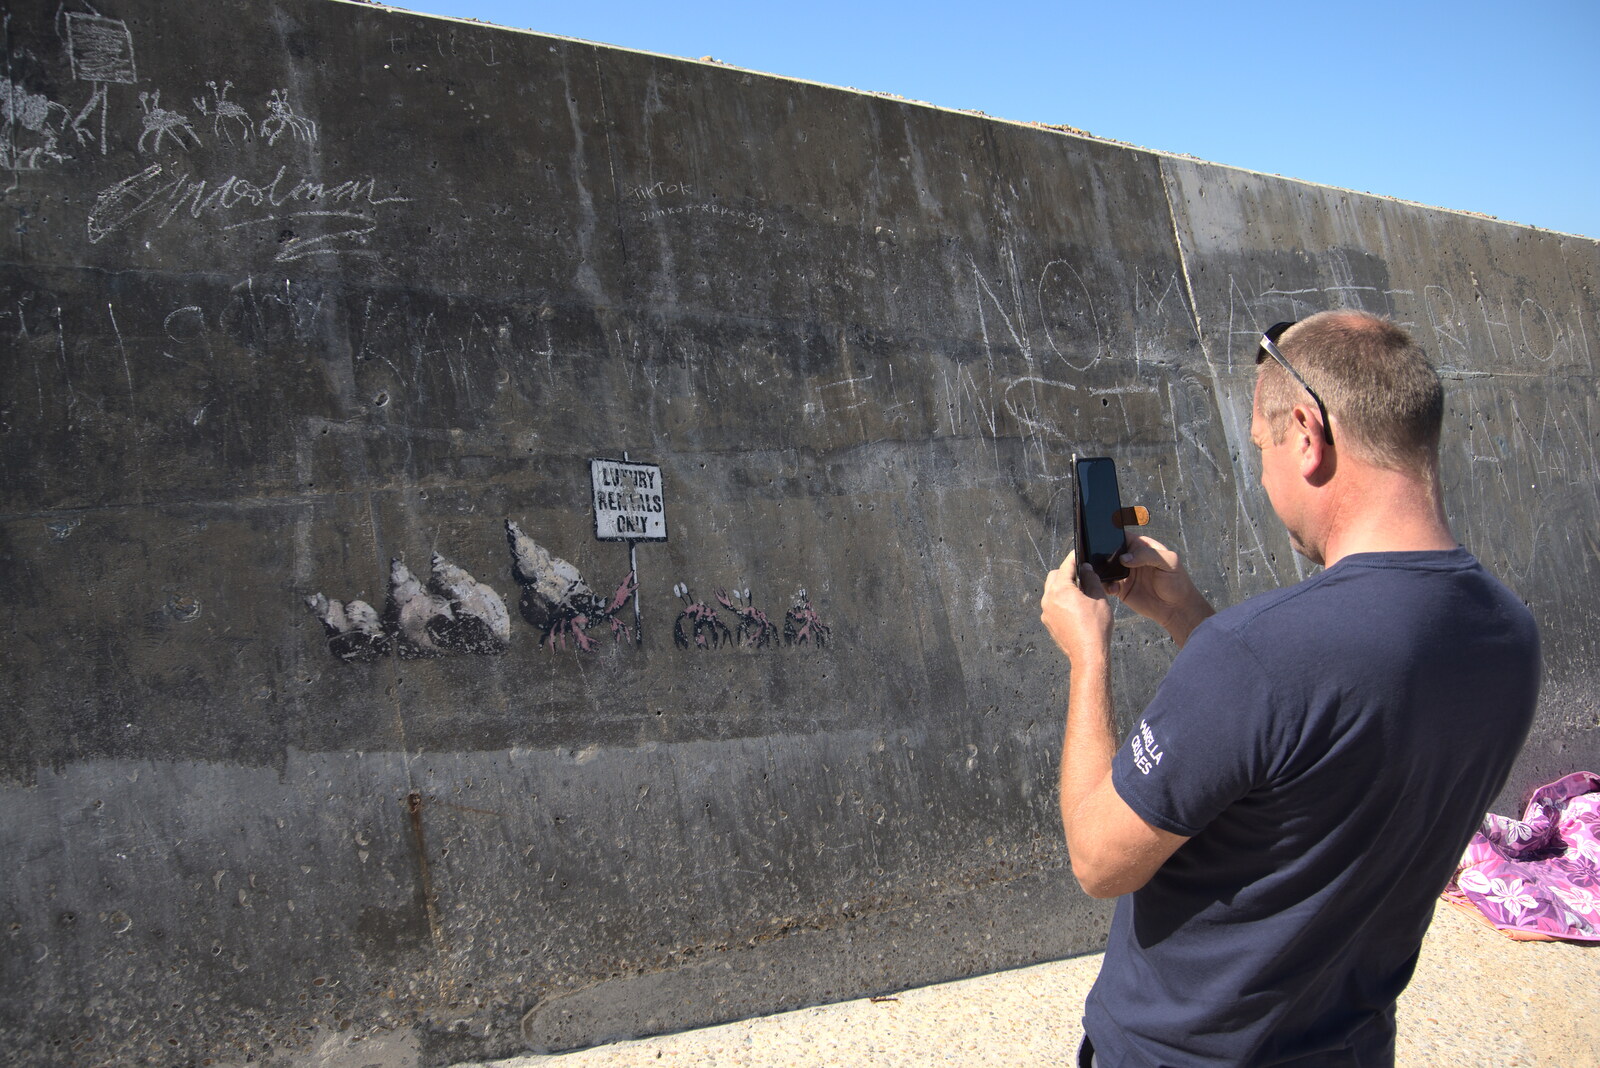 Andrew takes a photo of the Banksy from Camping at Forest Park, Cromer, Norfolk - 12th August 2022